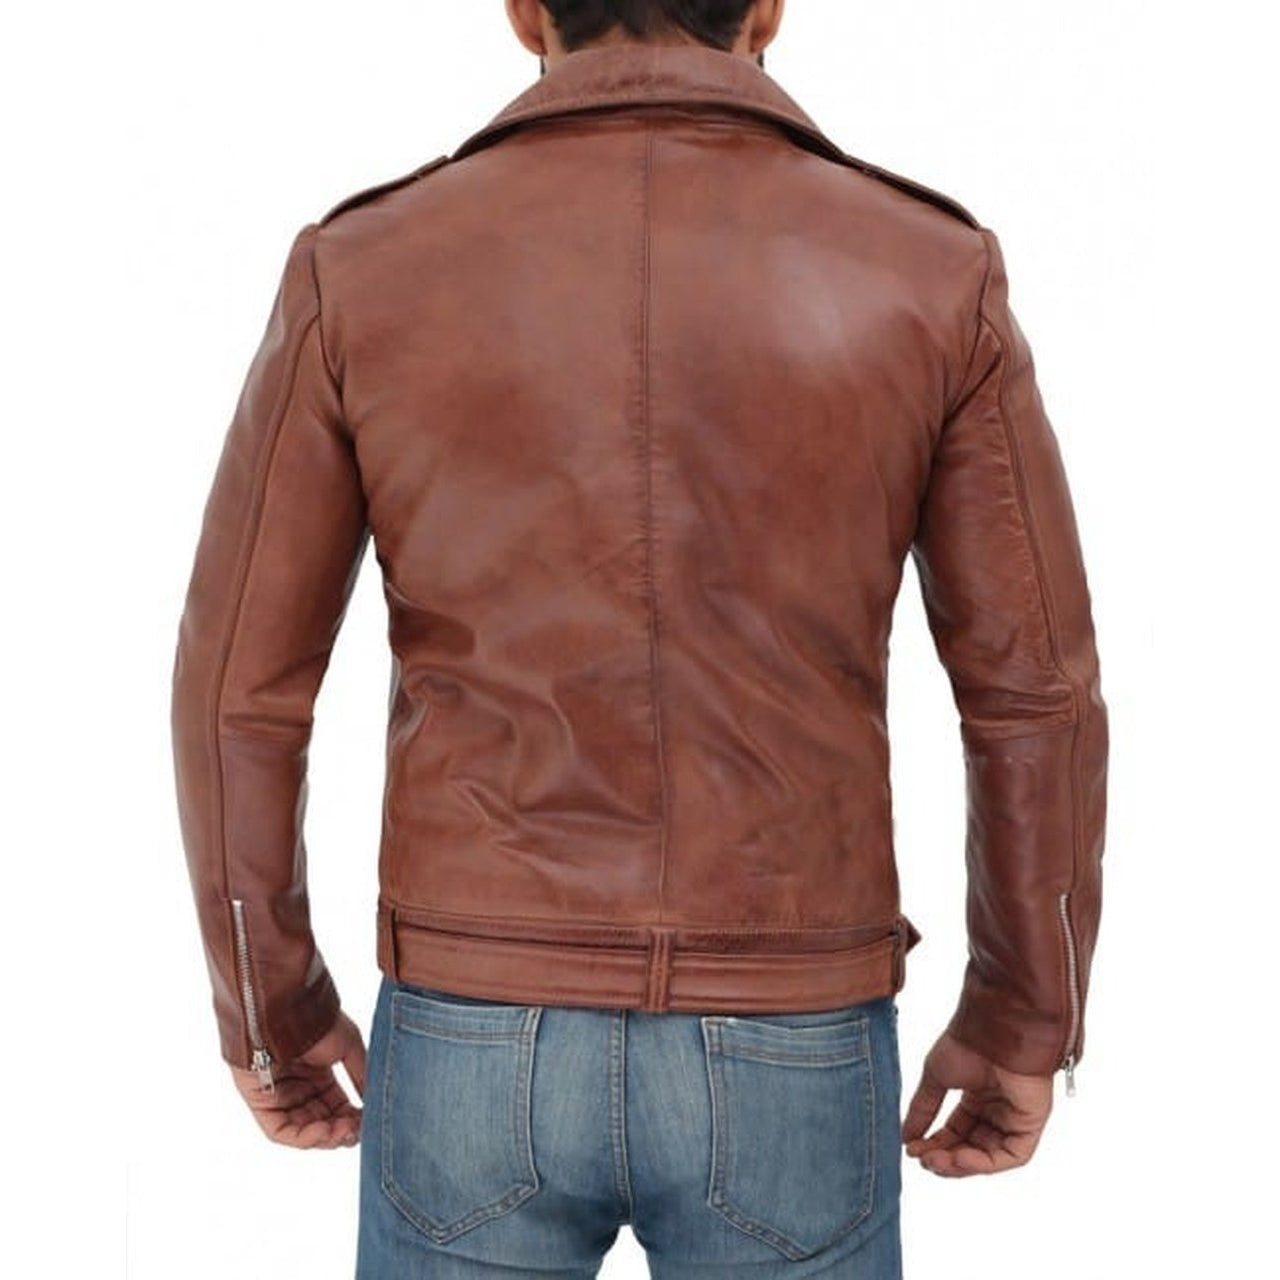 Brown Leather Motorcycle Jacket for Men - Leather Jacket